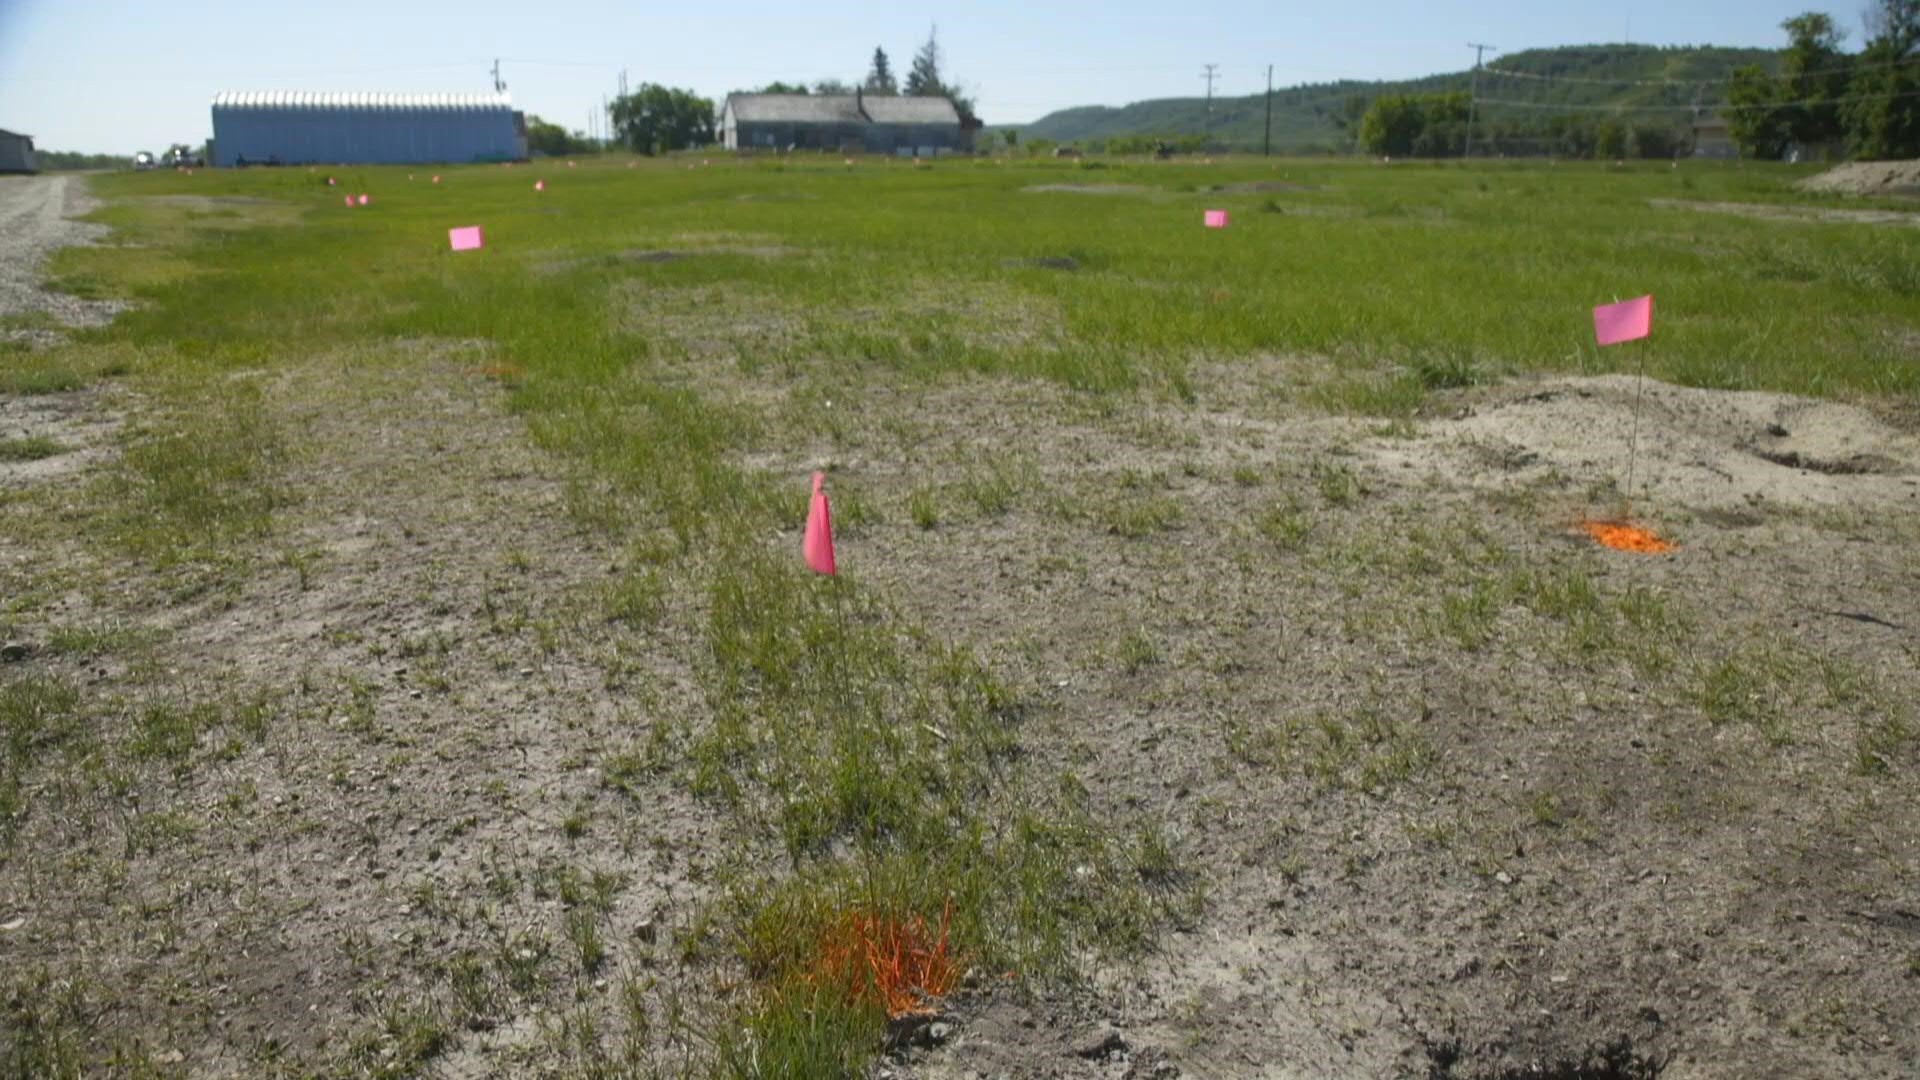 Canada: 751 unmarked graves discovered at indigenous school